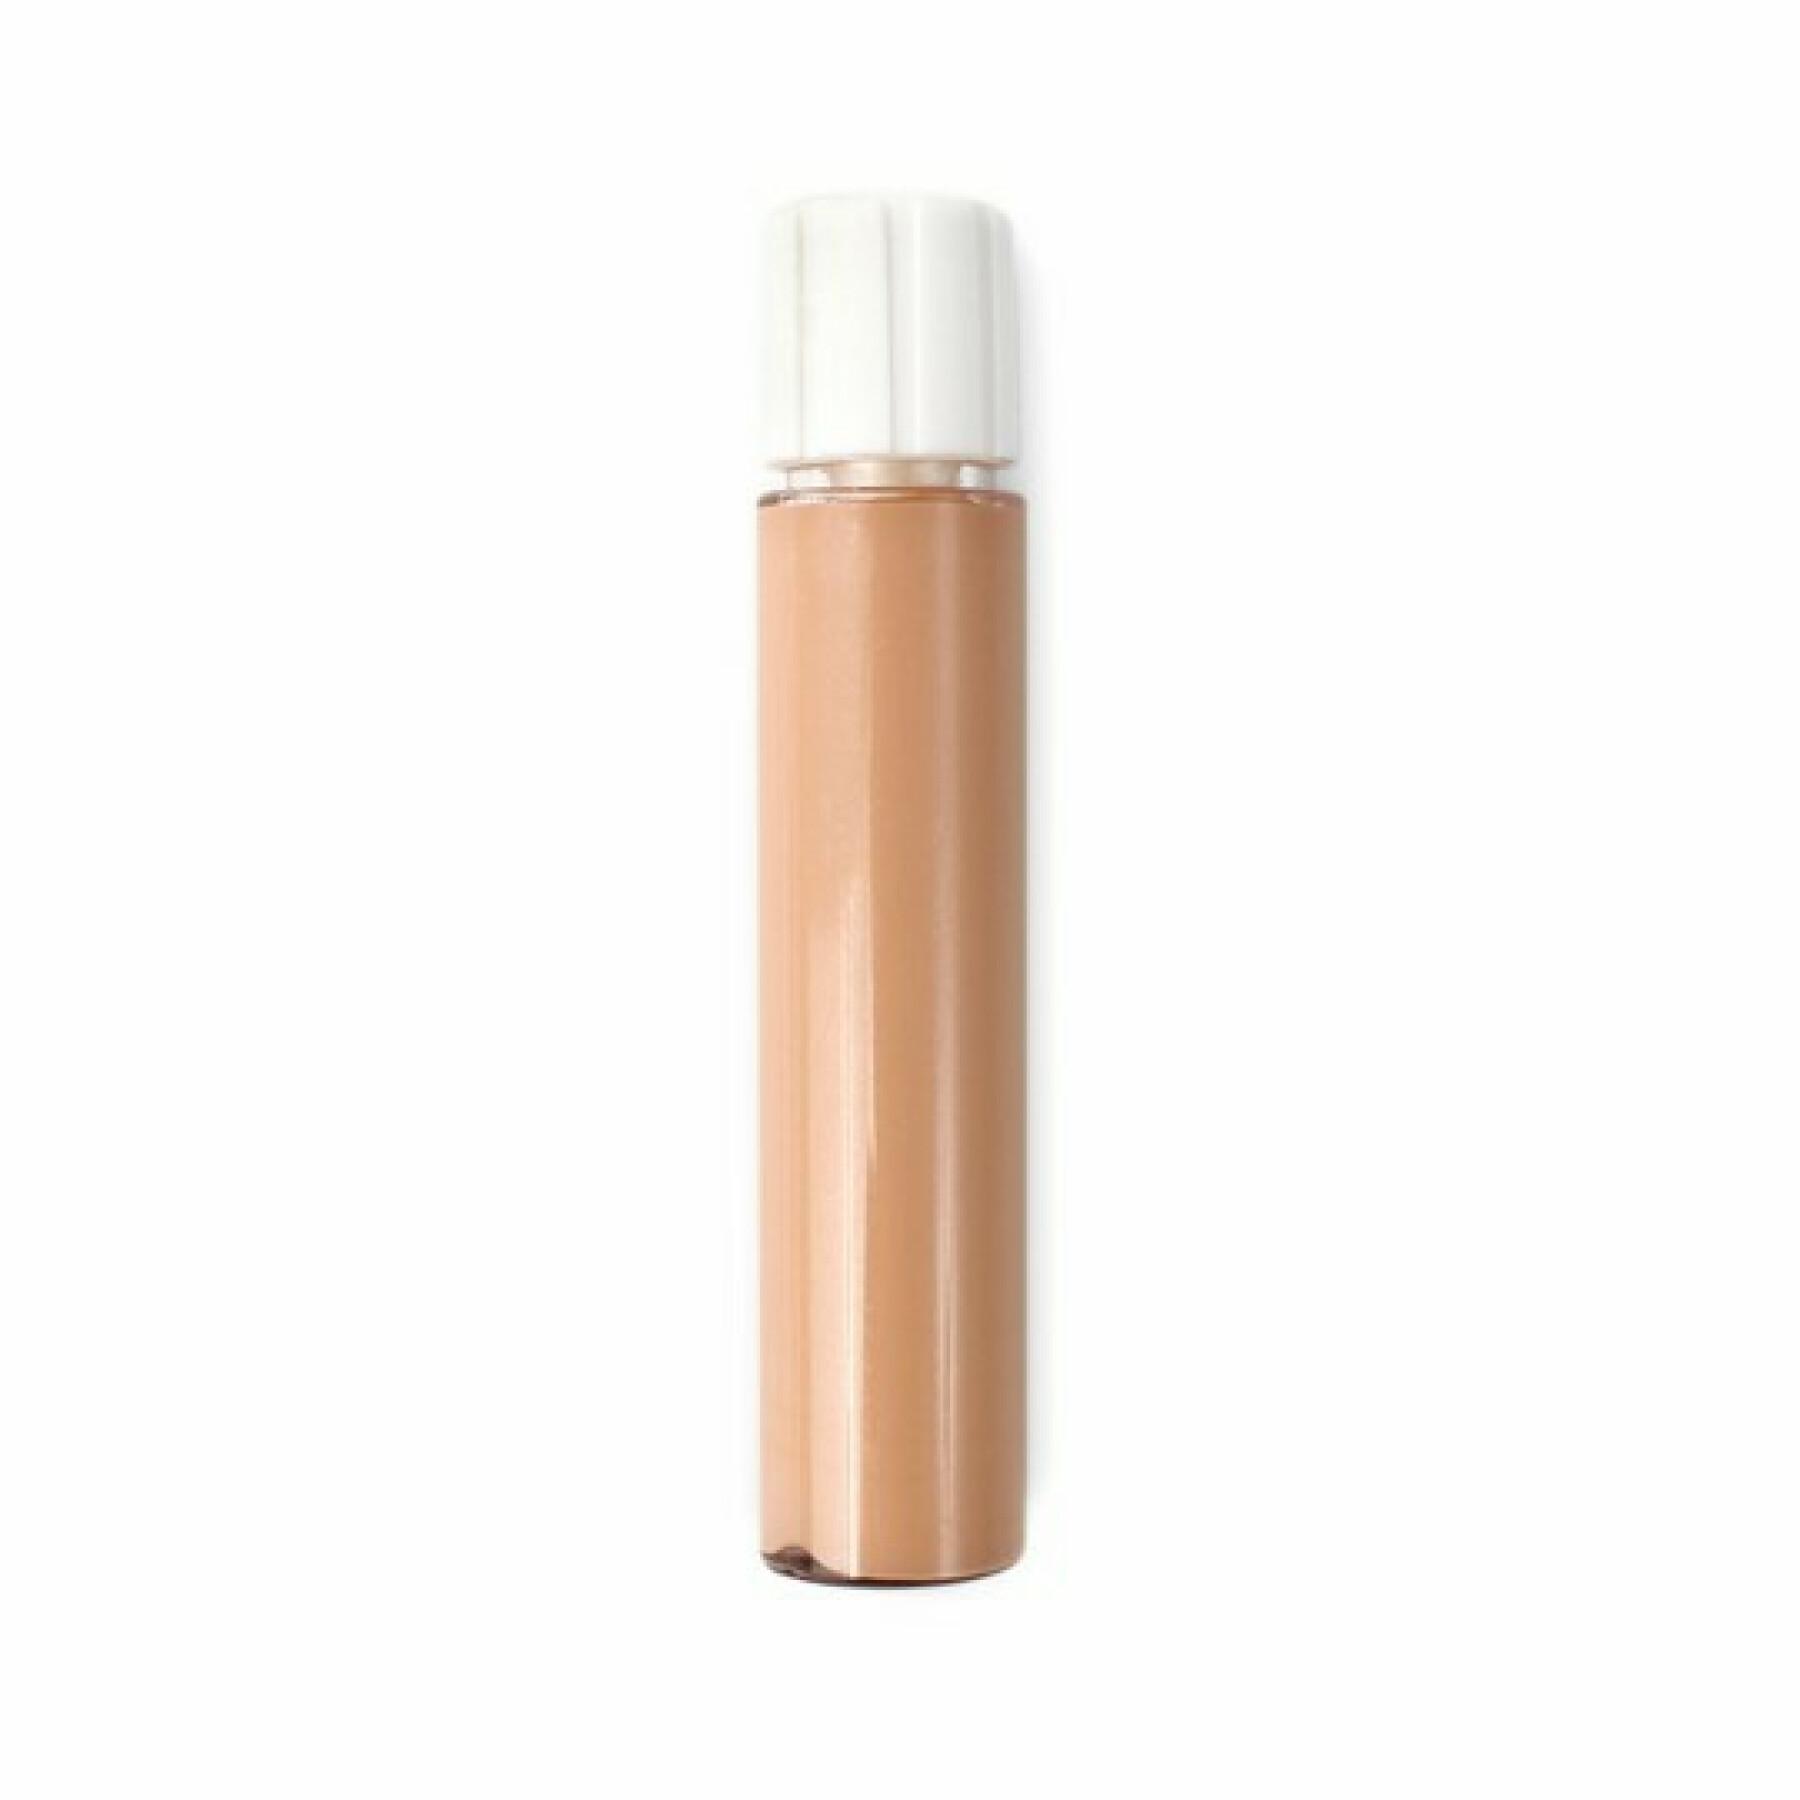 Refill for light touch of complexion 723 peach woman Zao